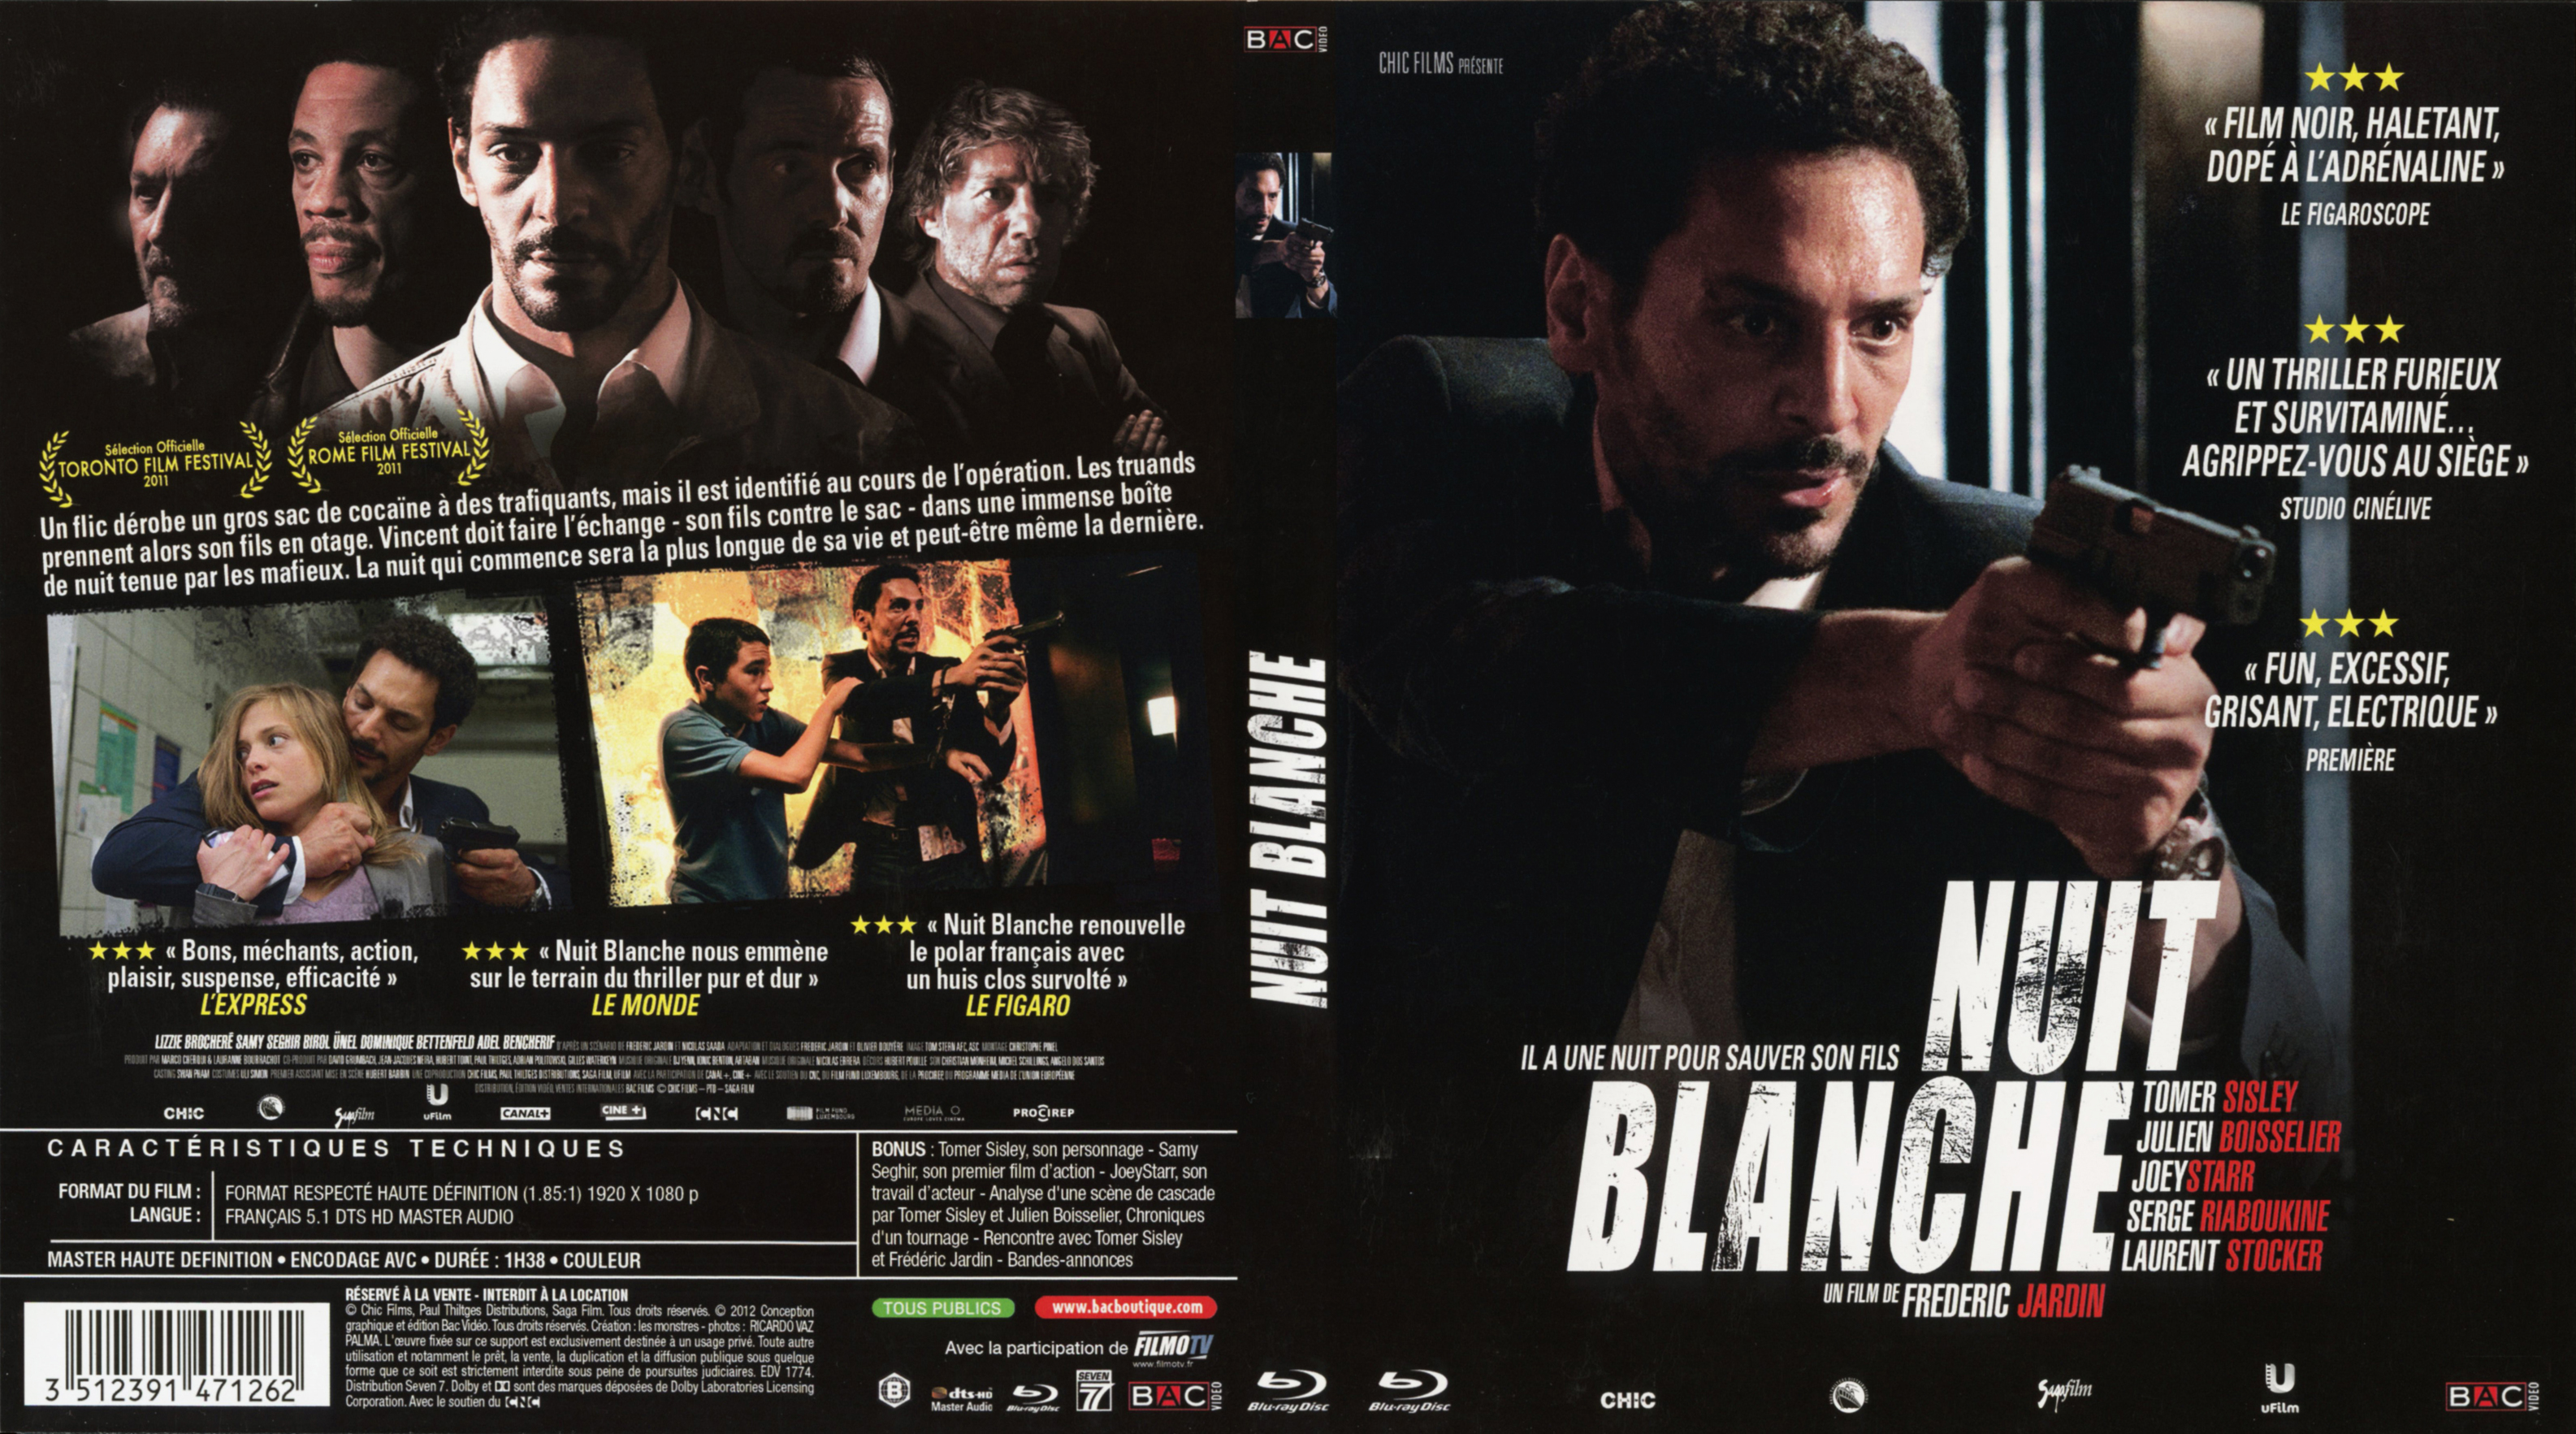 Jaquette DVD Nuit blanche (BLU-RAY)